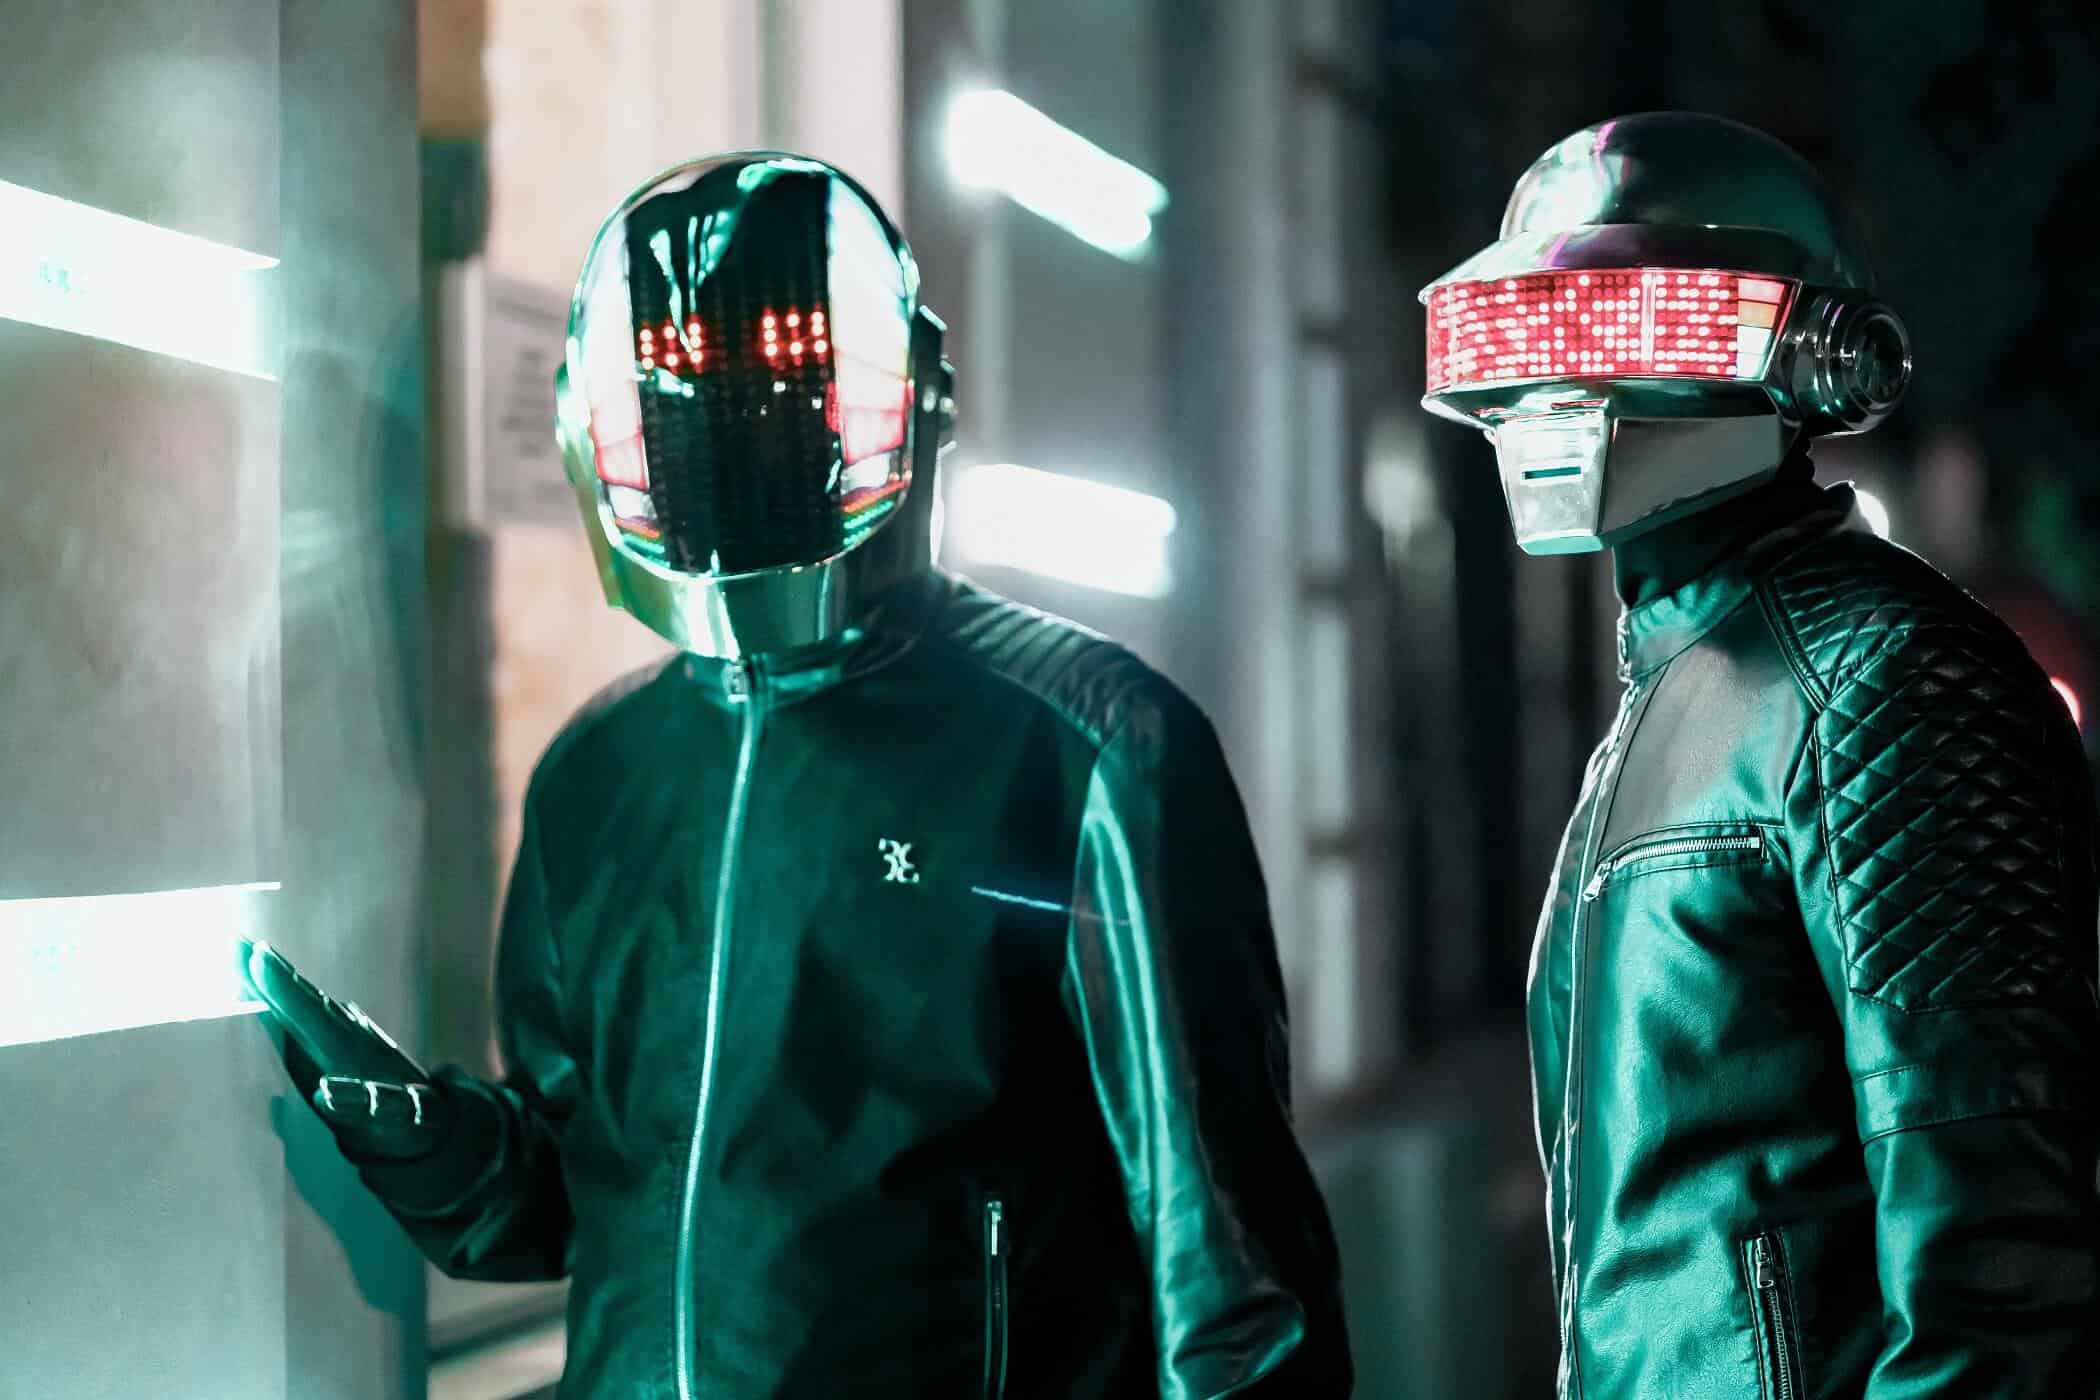 Spotify celebrates 20th anniversary of Daft Punk's ‘Discovery’ with Enhanced Playlist